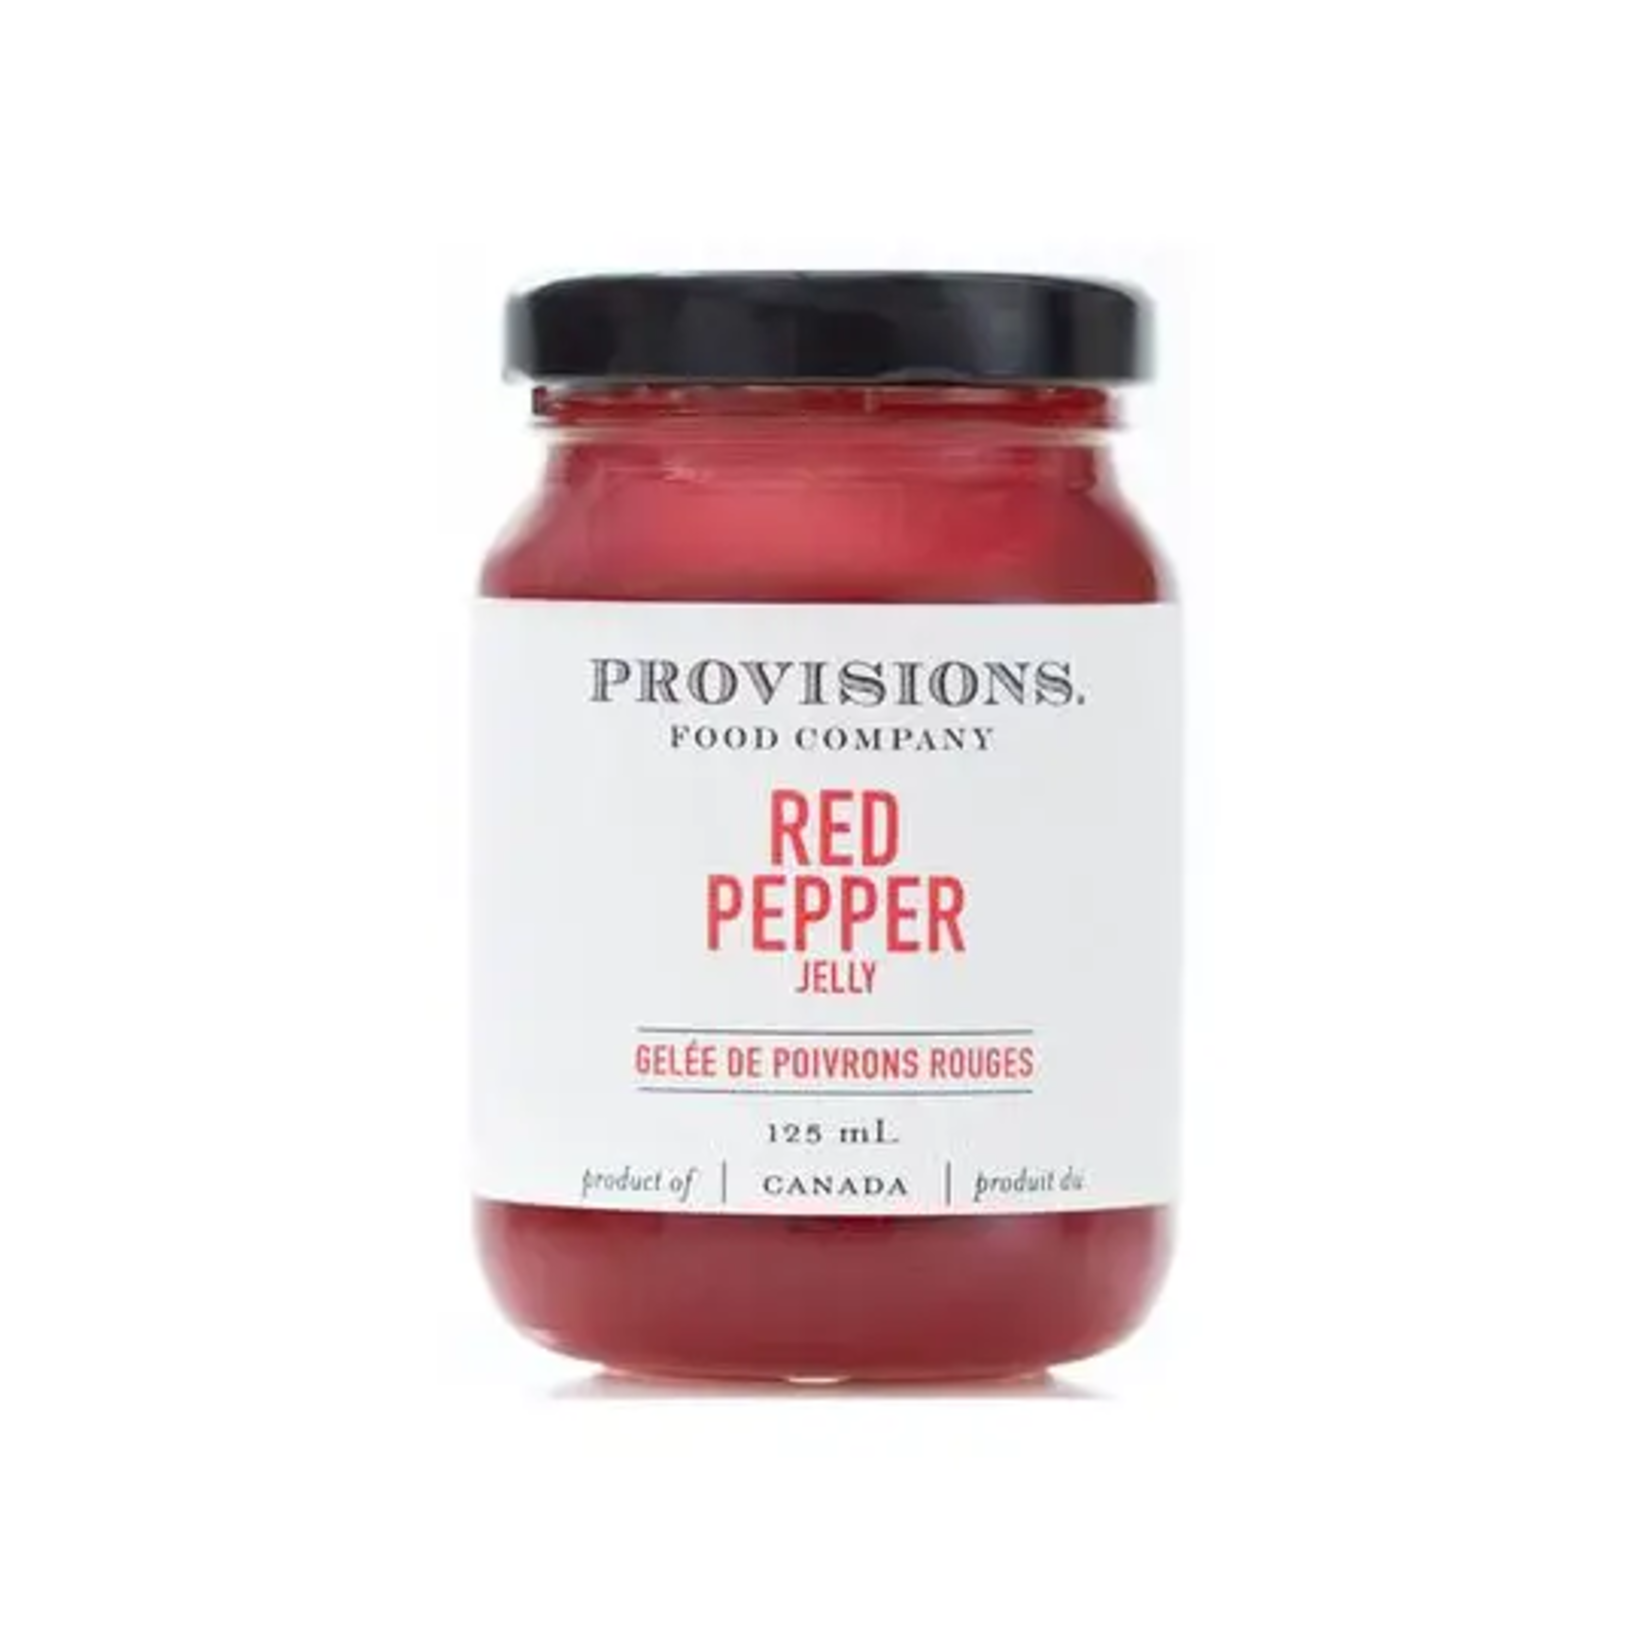 Provisions Food Company Red Pepper Jelly - 125ml